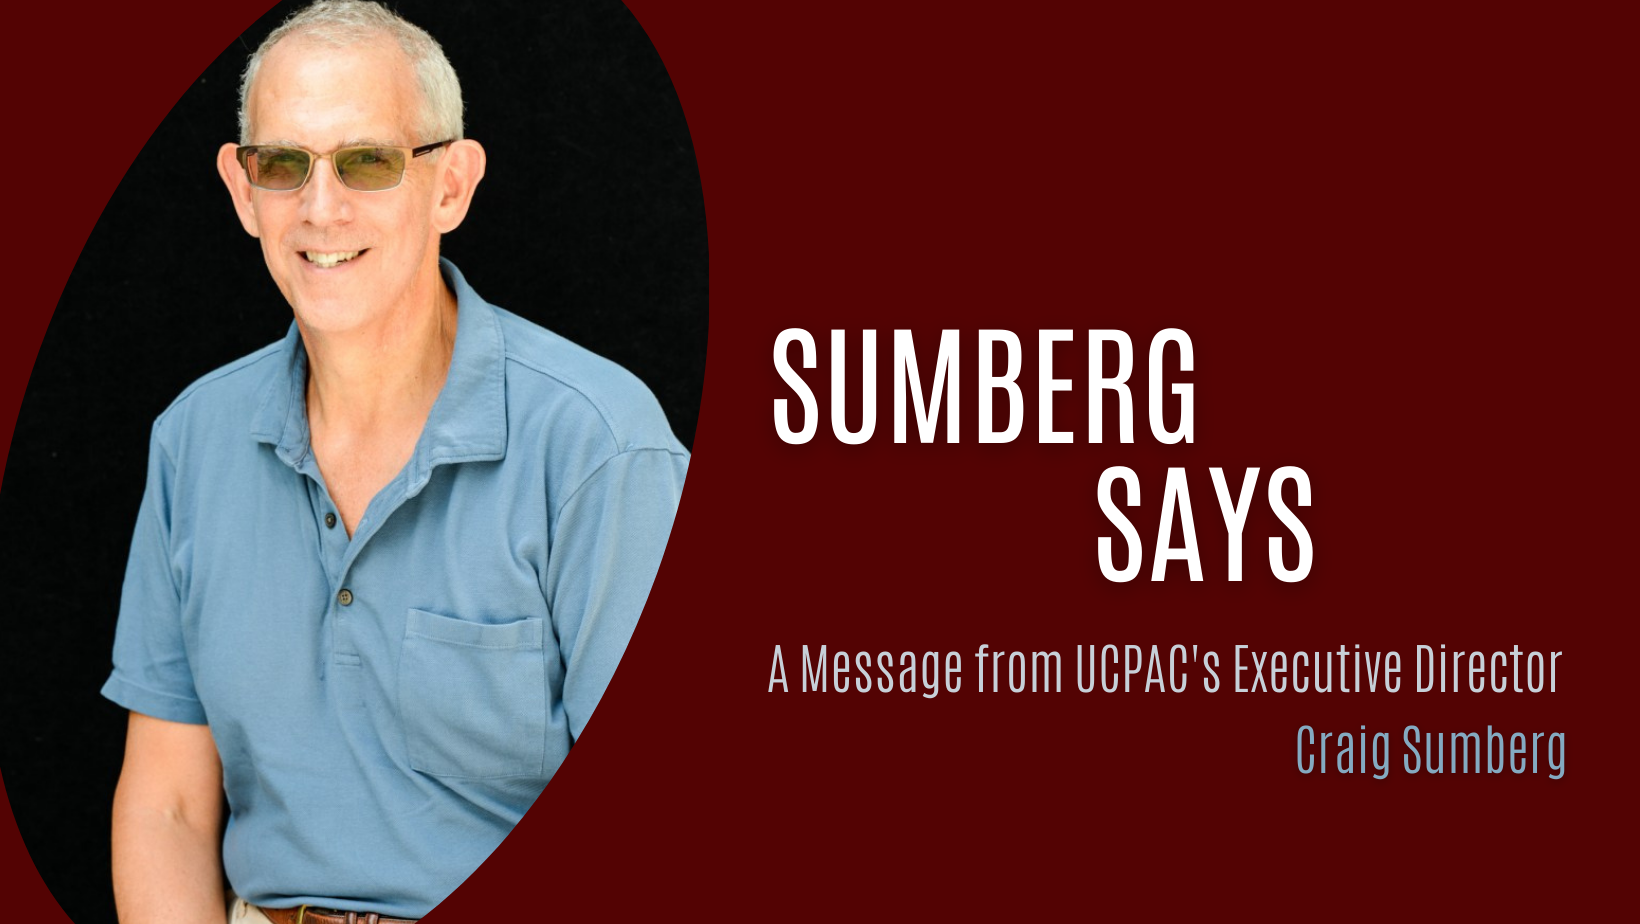 Time for the third installment of “Sumberg Says” .